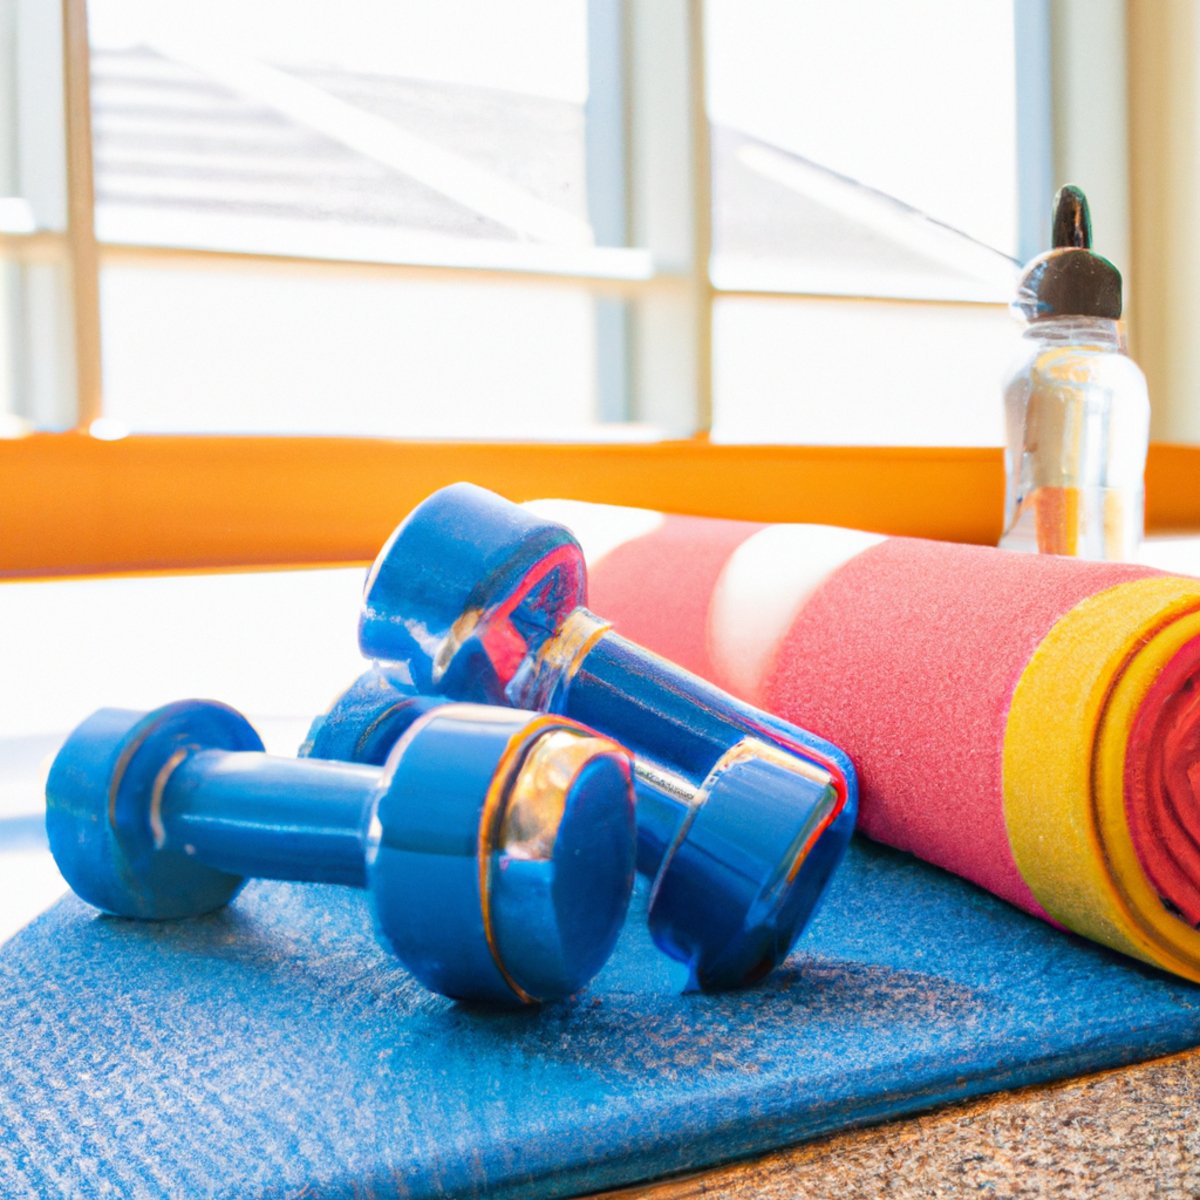 The photo features a set of colorful dumbbells arranged neatly on a yoga mat, with a water bottle and towel placed beside them. The background shows a bright and airy fitness studio, with large windows letting in natural light. The objects in the photo suggest a focus on strength training and hydration, emphasizing the importance of staying active and healthy as we age, particularly for senior exercises and fitness. The lifelike quality of the photo makes it easy to imagine oneself in the same space, ready to embark on a fitness journey tailored to senior exercises and fitness goals.